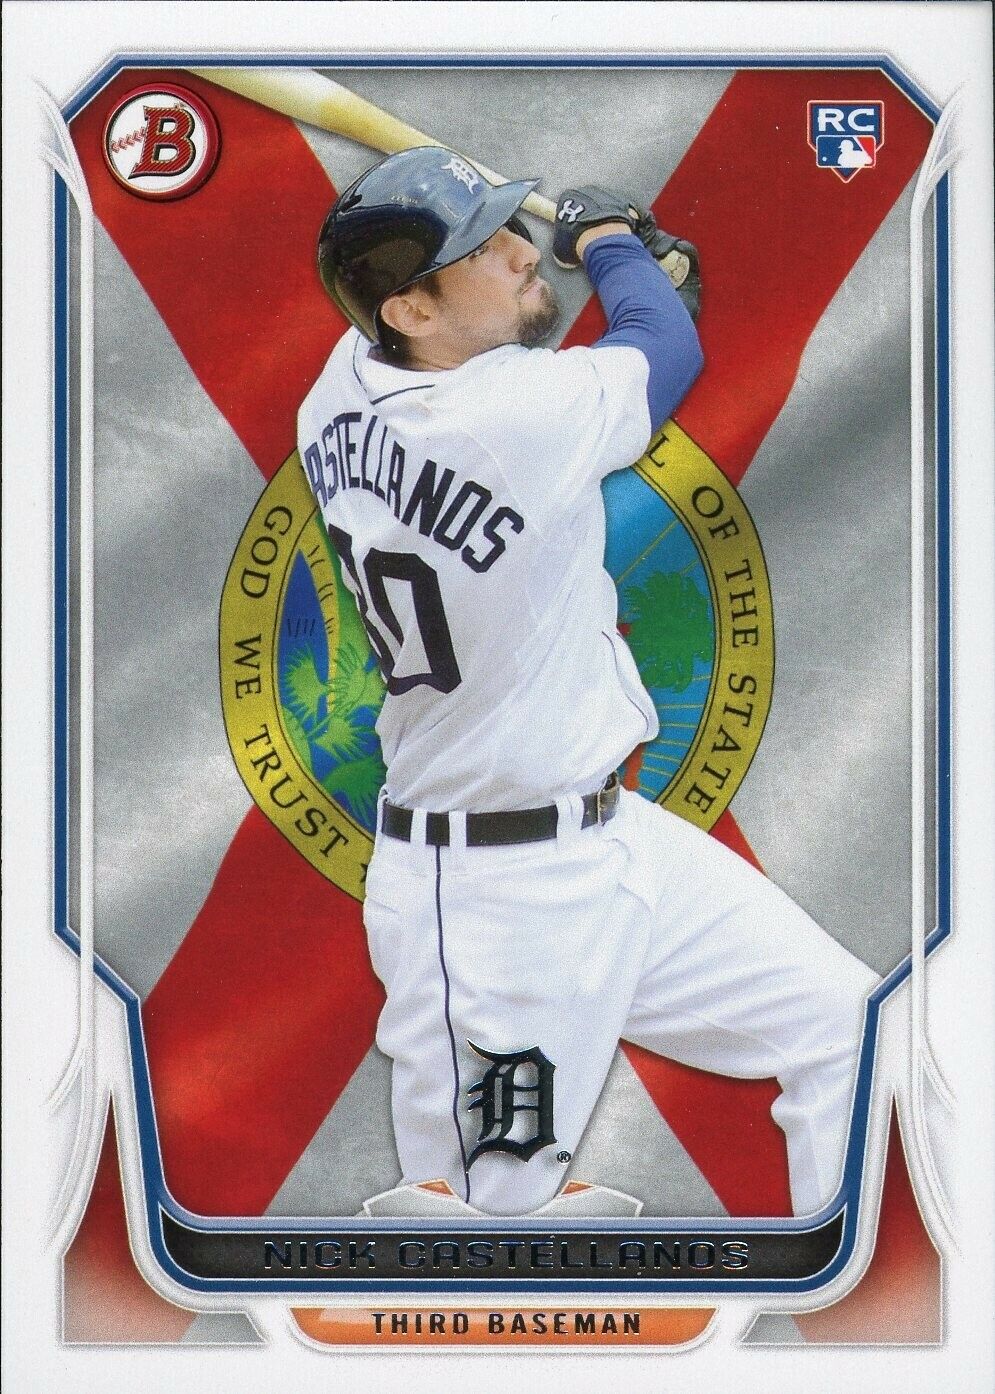 2014 Bowman Nick Castellanos #127 Rookie Card (RC) State Flag Variation. rookie card picture